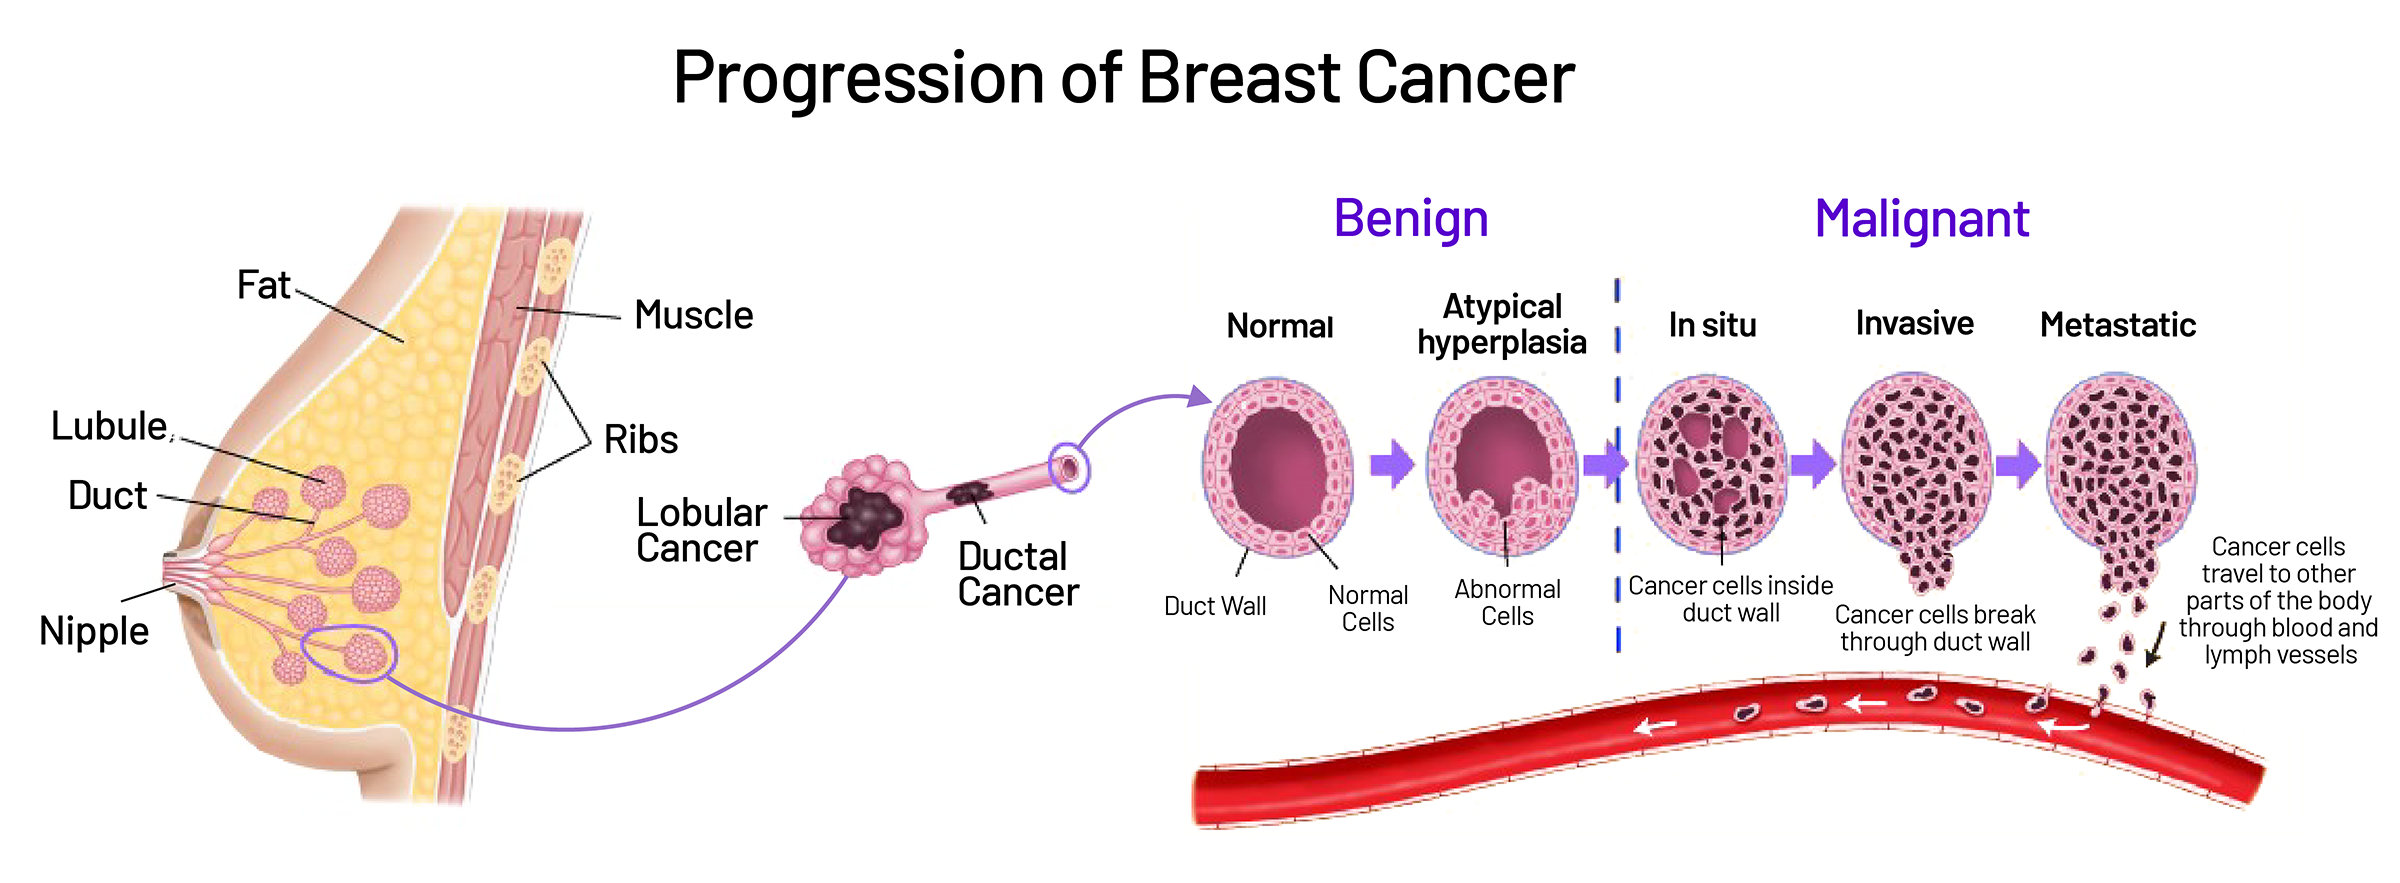 Types of Breast Cancer  Saint John's Cancer Institute